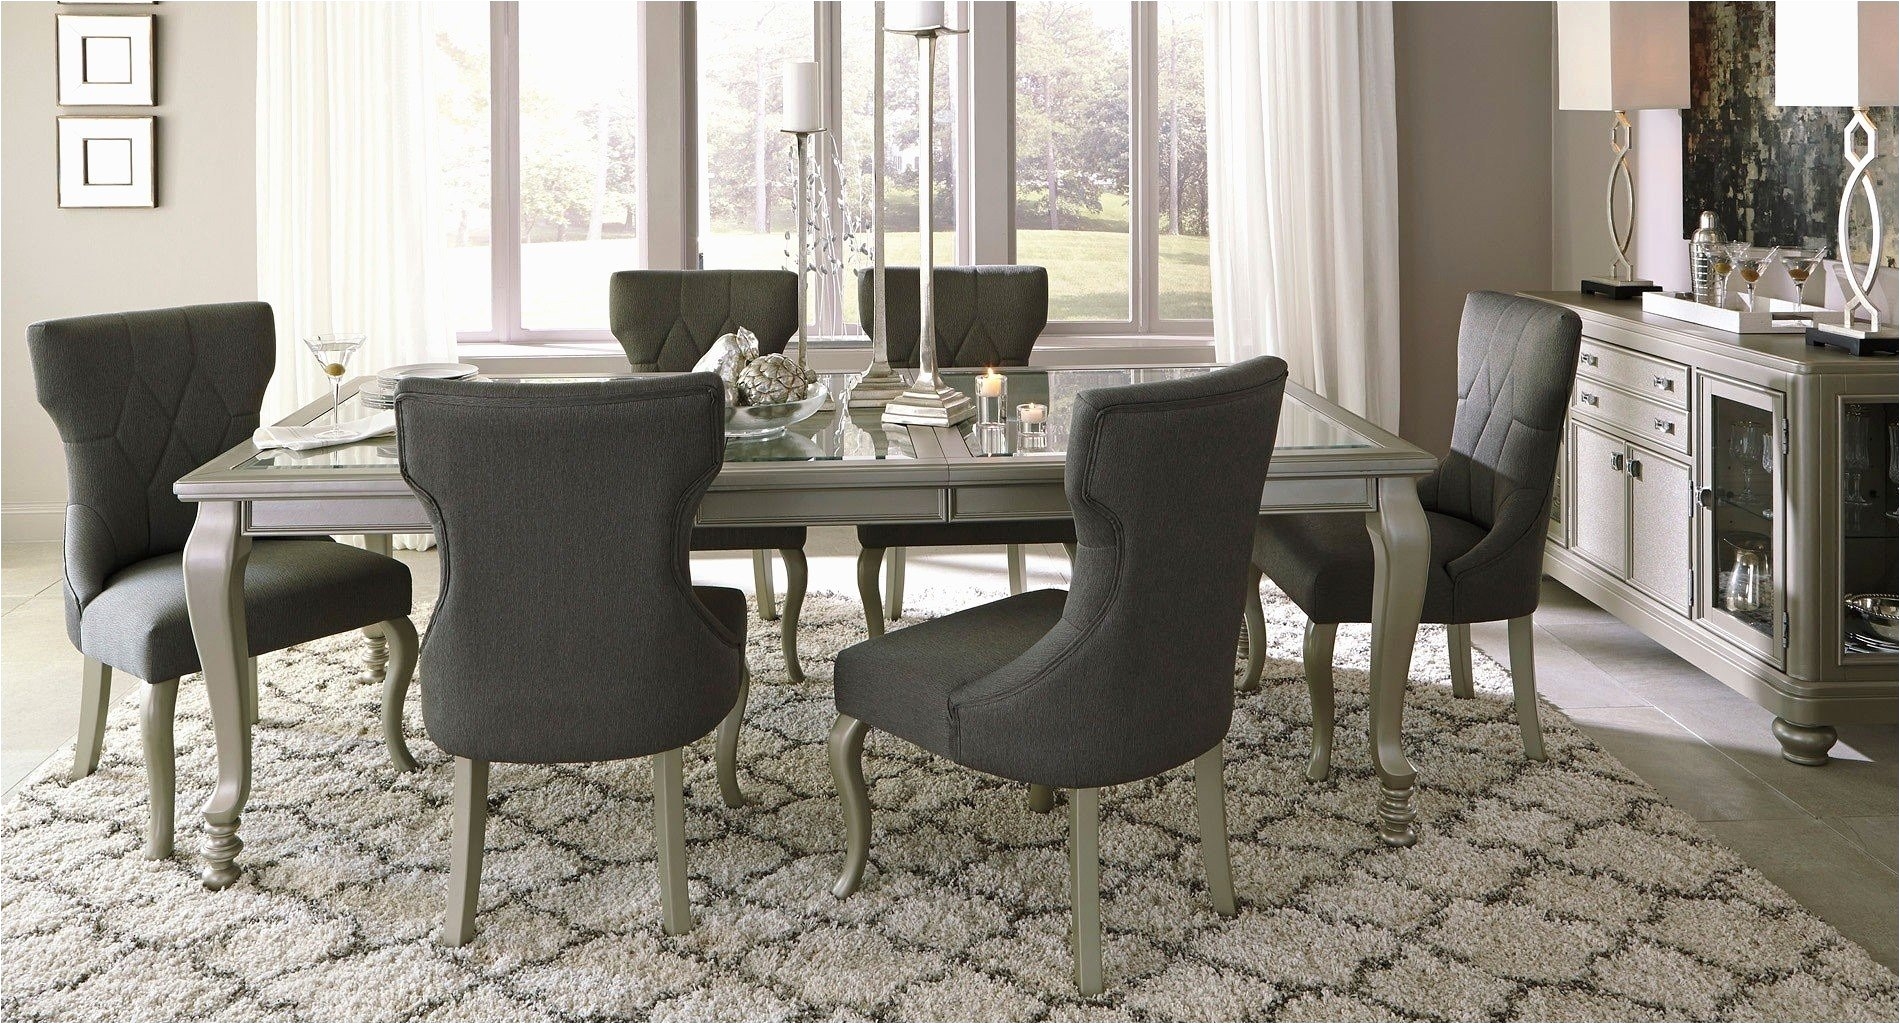 Casual Dining Room Inspirational Casual Chairs Luxury Dining Room Ideas Stylish Shaker Chairs 0d